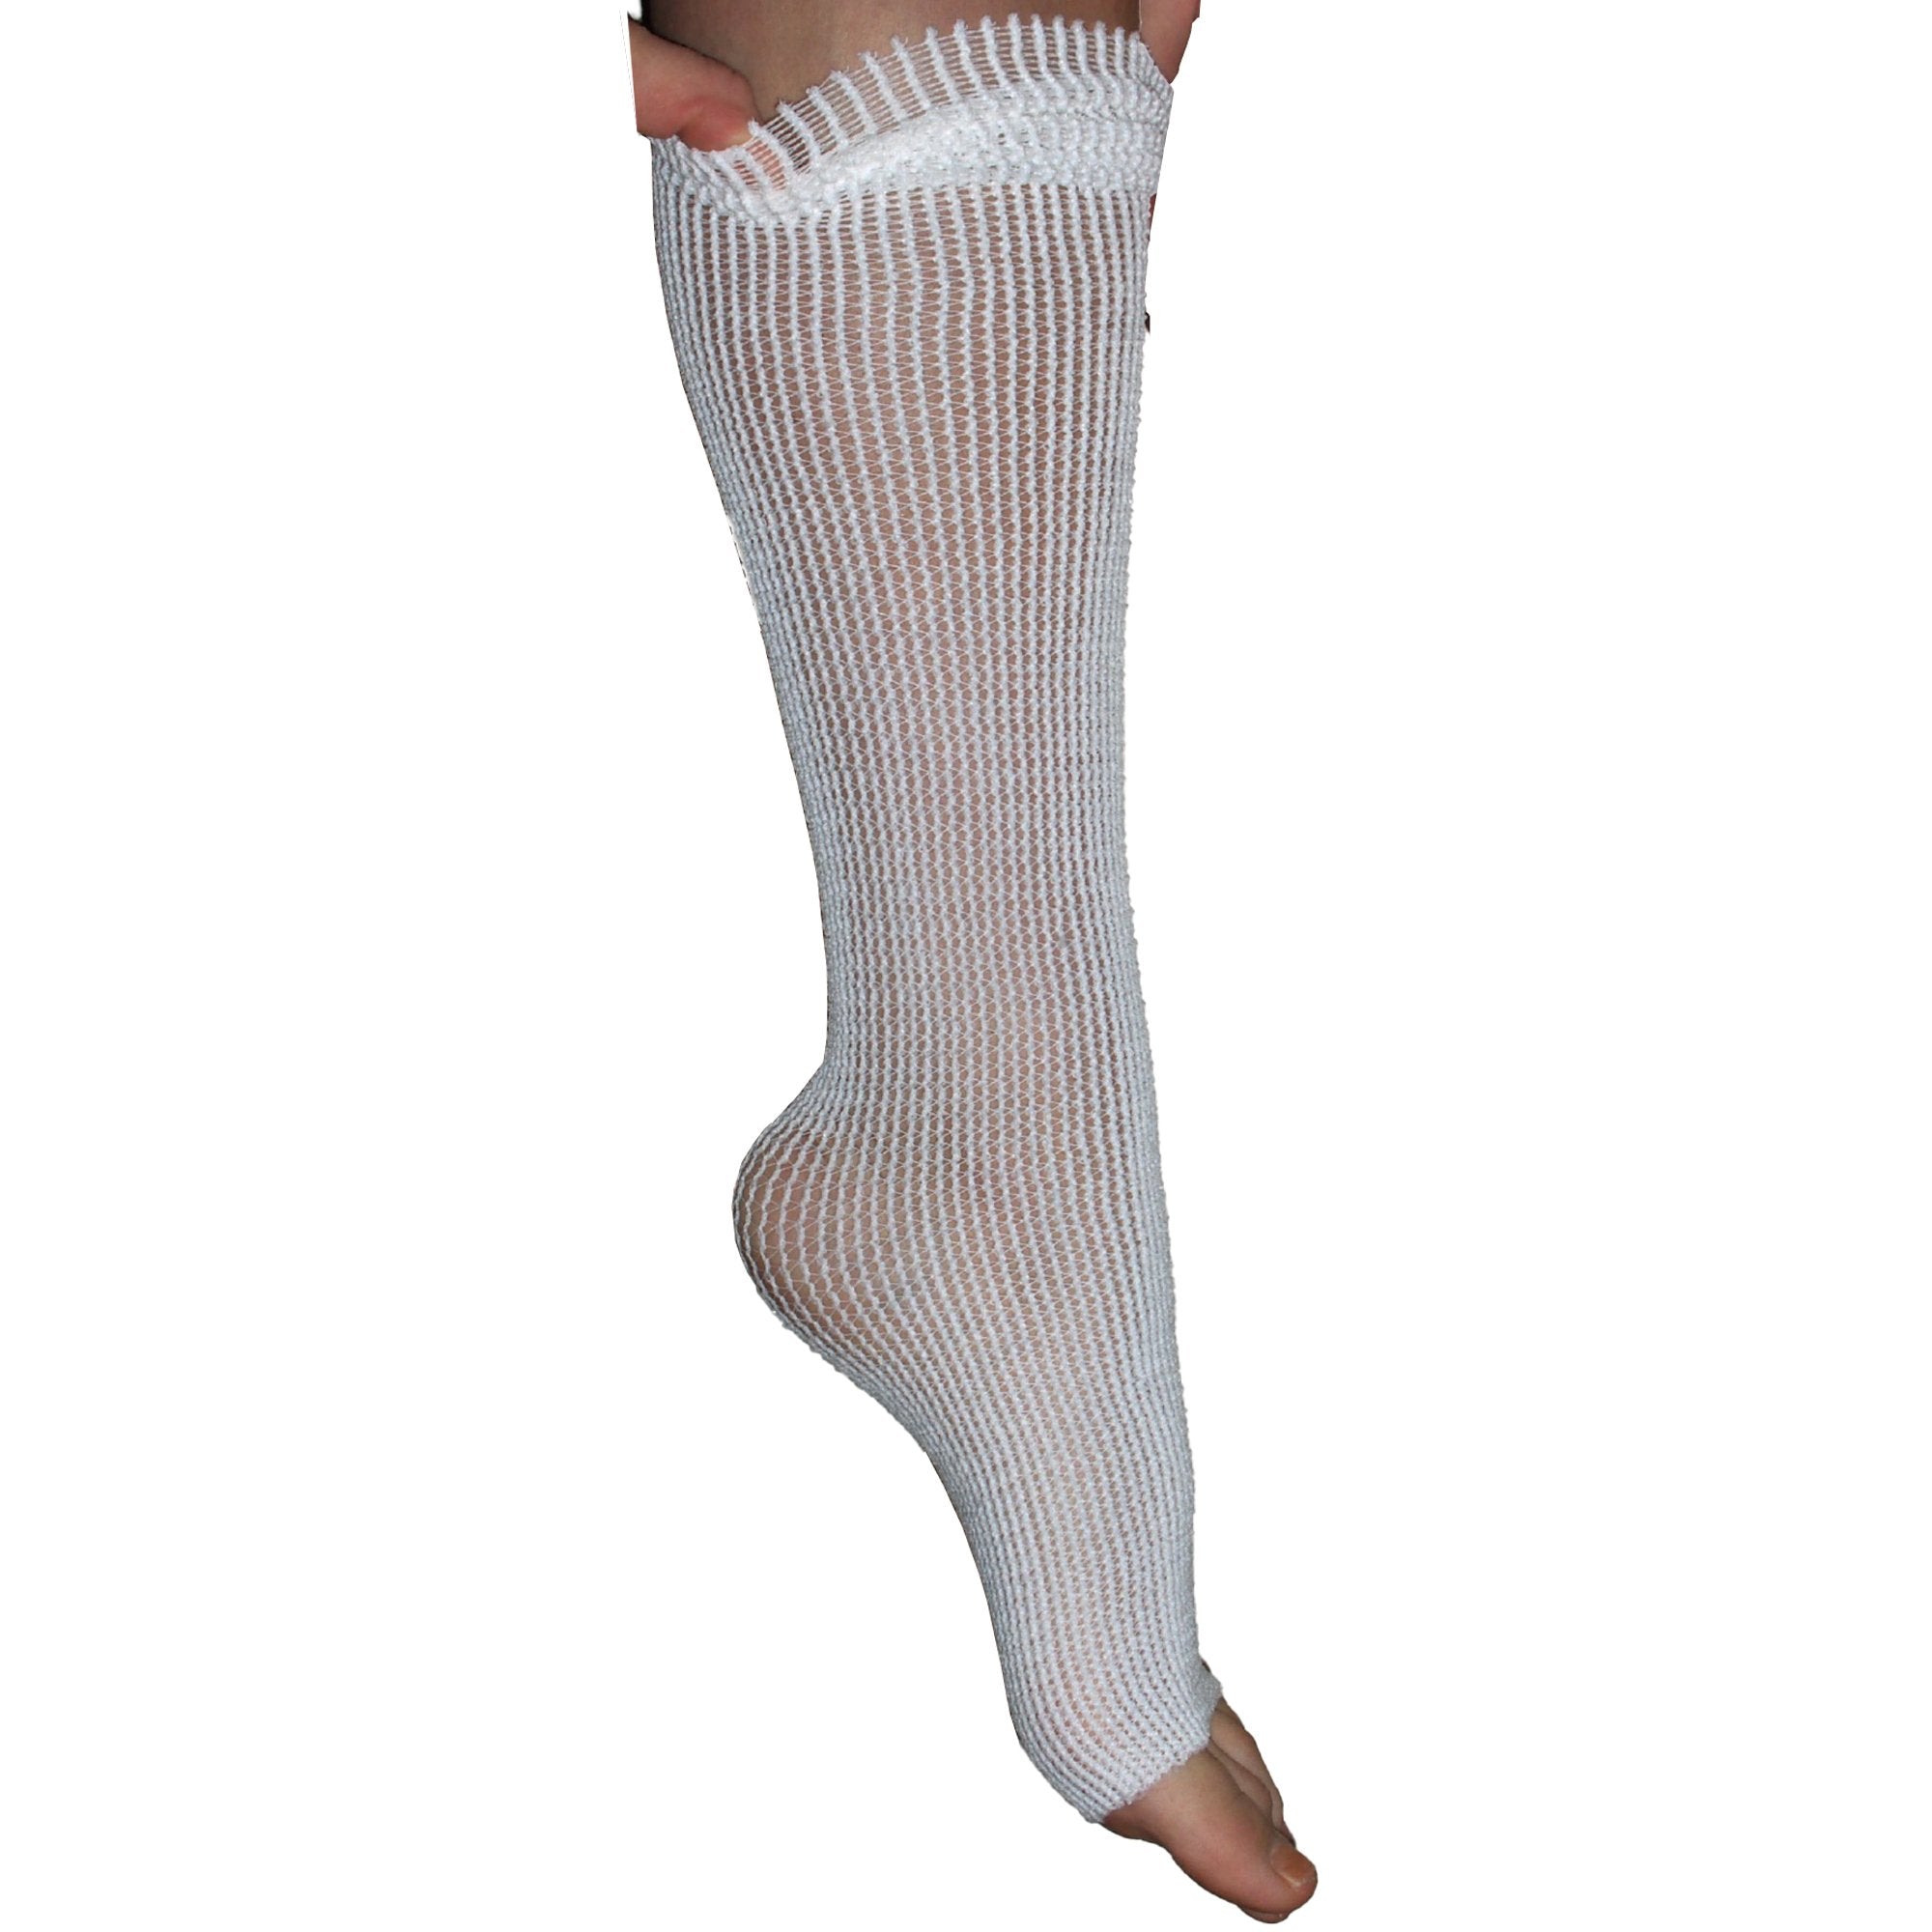 Compression Stockinette EdemaWear Medium White Wrist to Shoulder / Foot to Groin